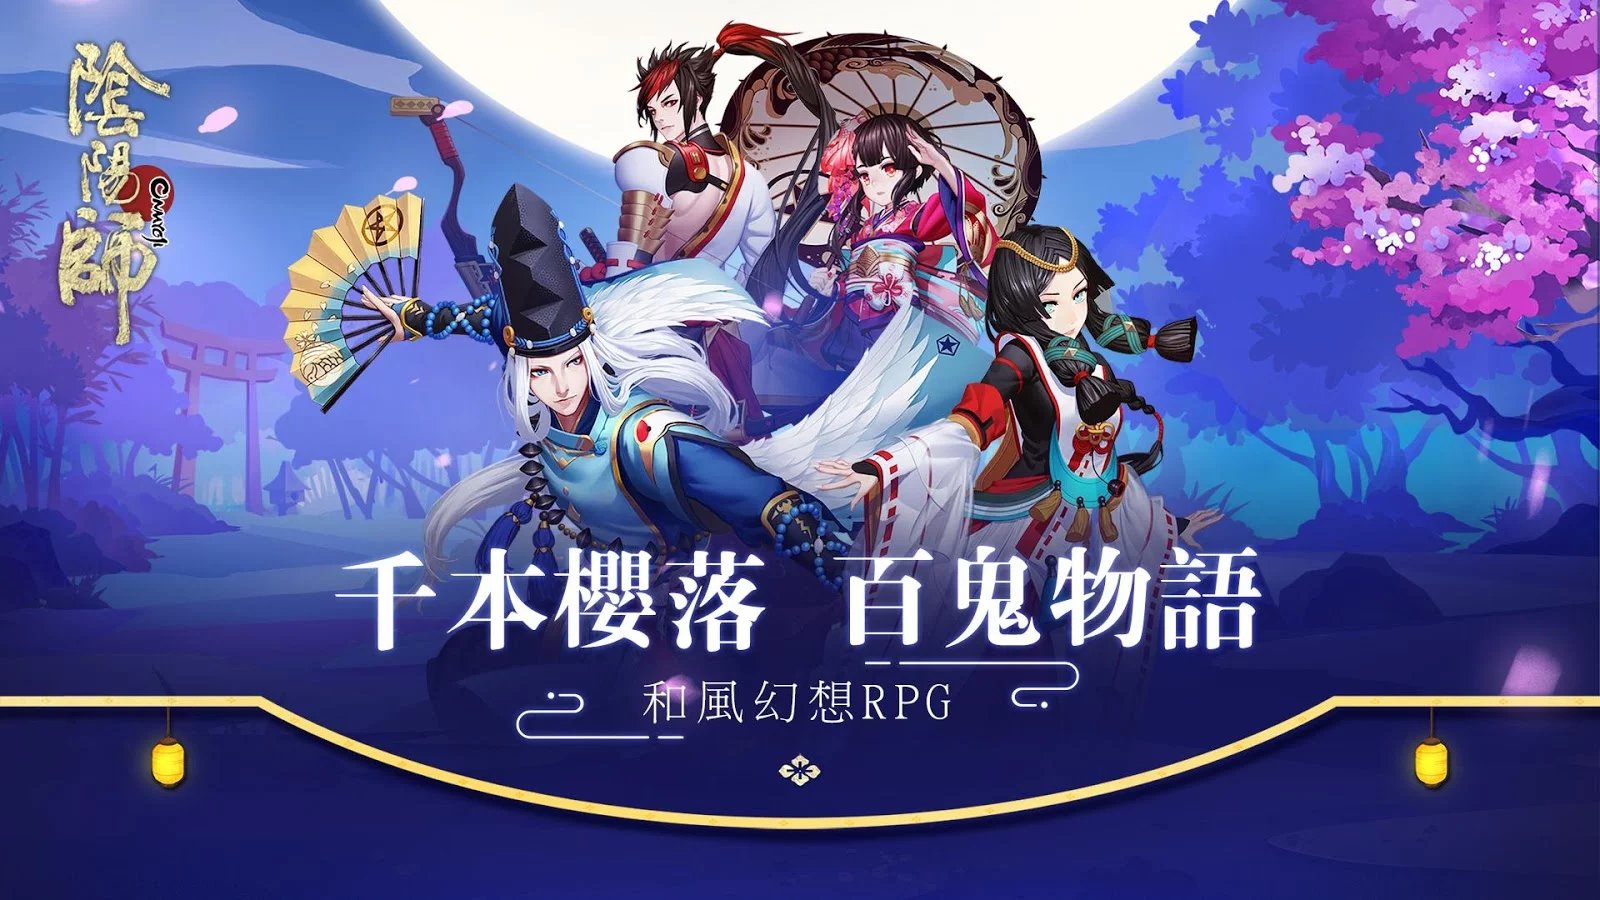 Daniel Ahmad Netease Will Release Onmyouji In Japan On The 23rd Of Feb The Acg Fantasy Rpg Title Is A Hit In China Has Been In The Top 5 Since